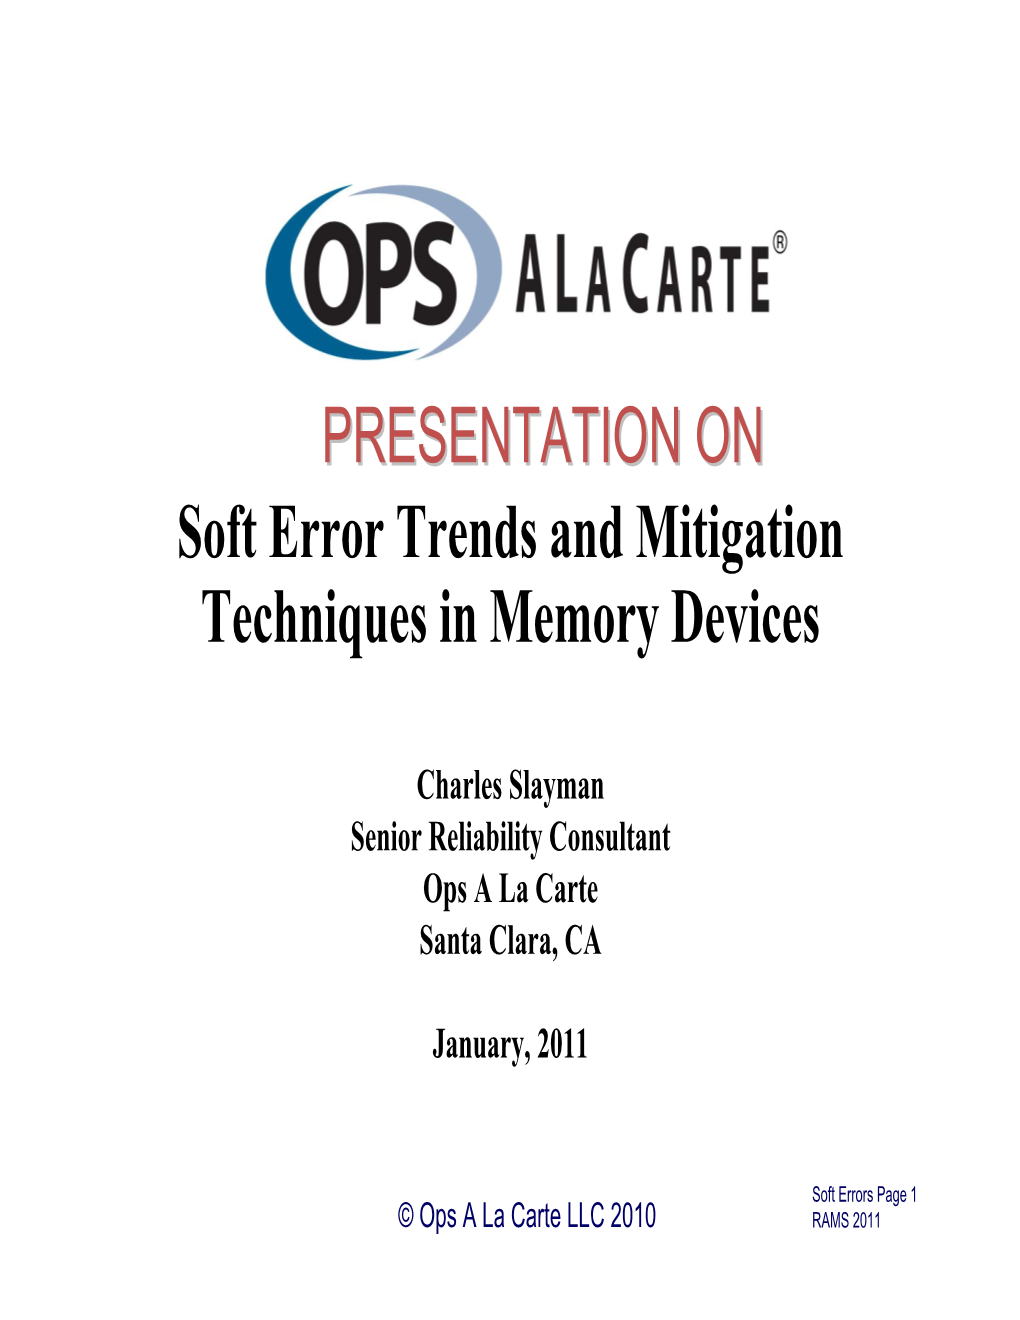 Soft Error Trends and Mitigation Techniques in Memory Devices